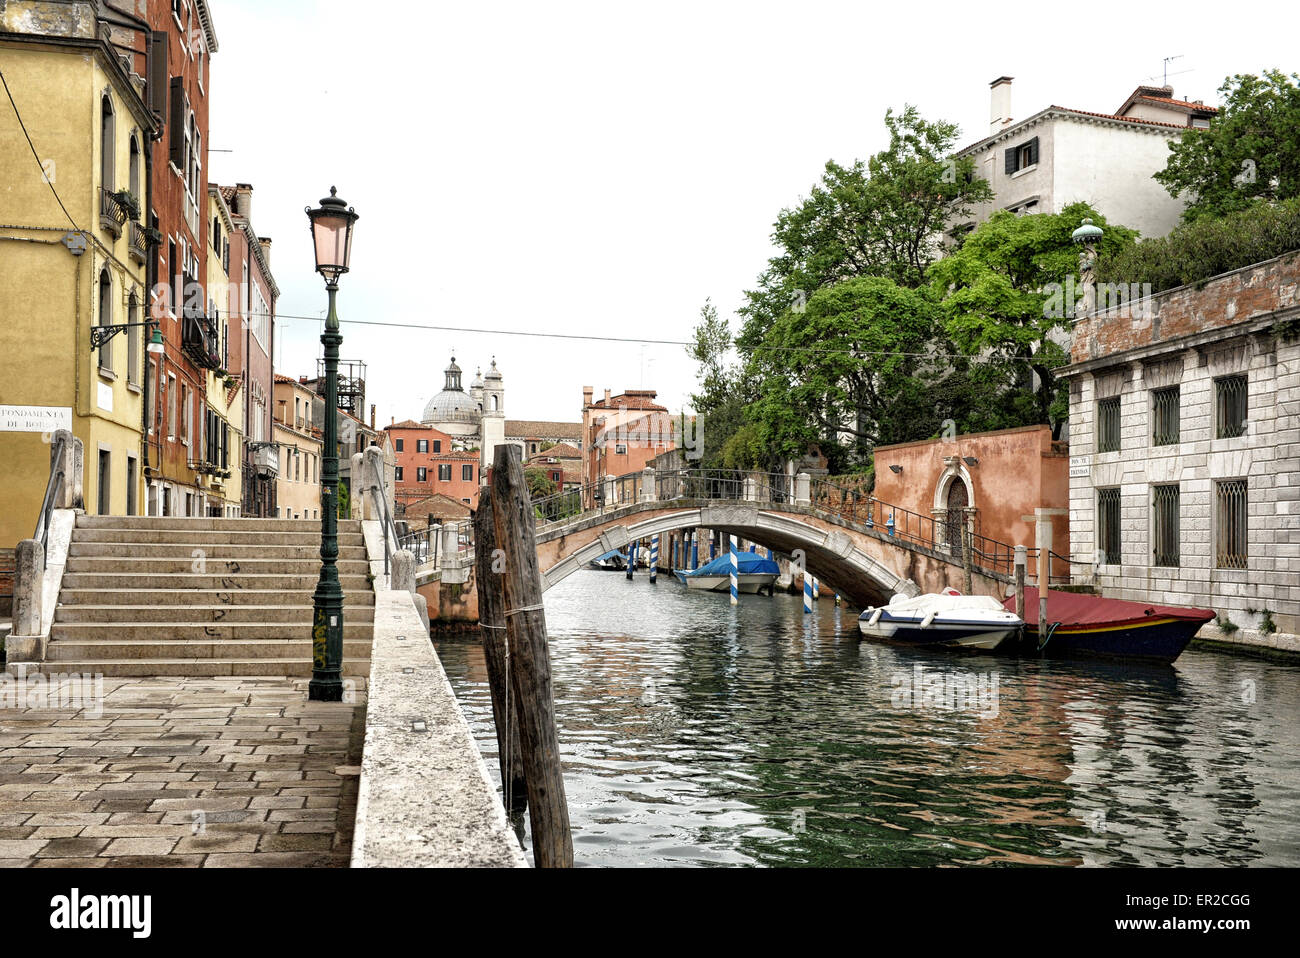 Idyllic Italian Scene with Foot Bridge Spanning Canal Lined with Low Rise Buildings, Venice, Italy Stock Photo